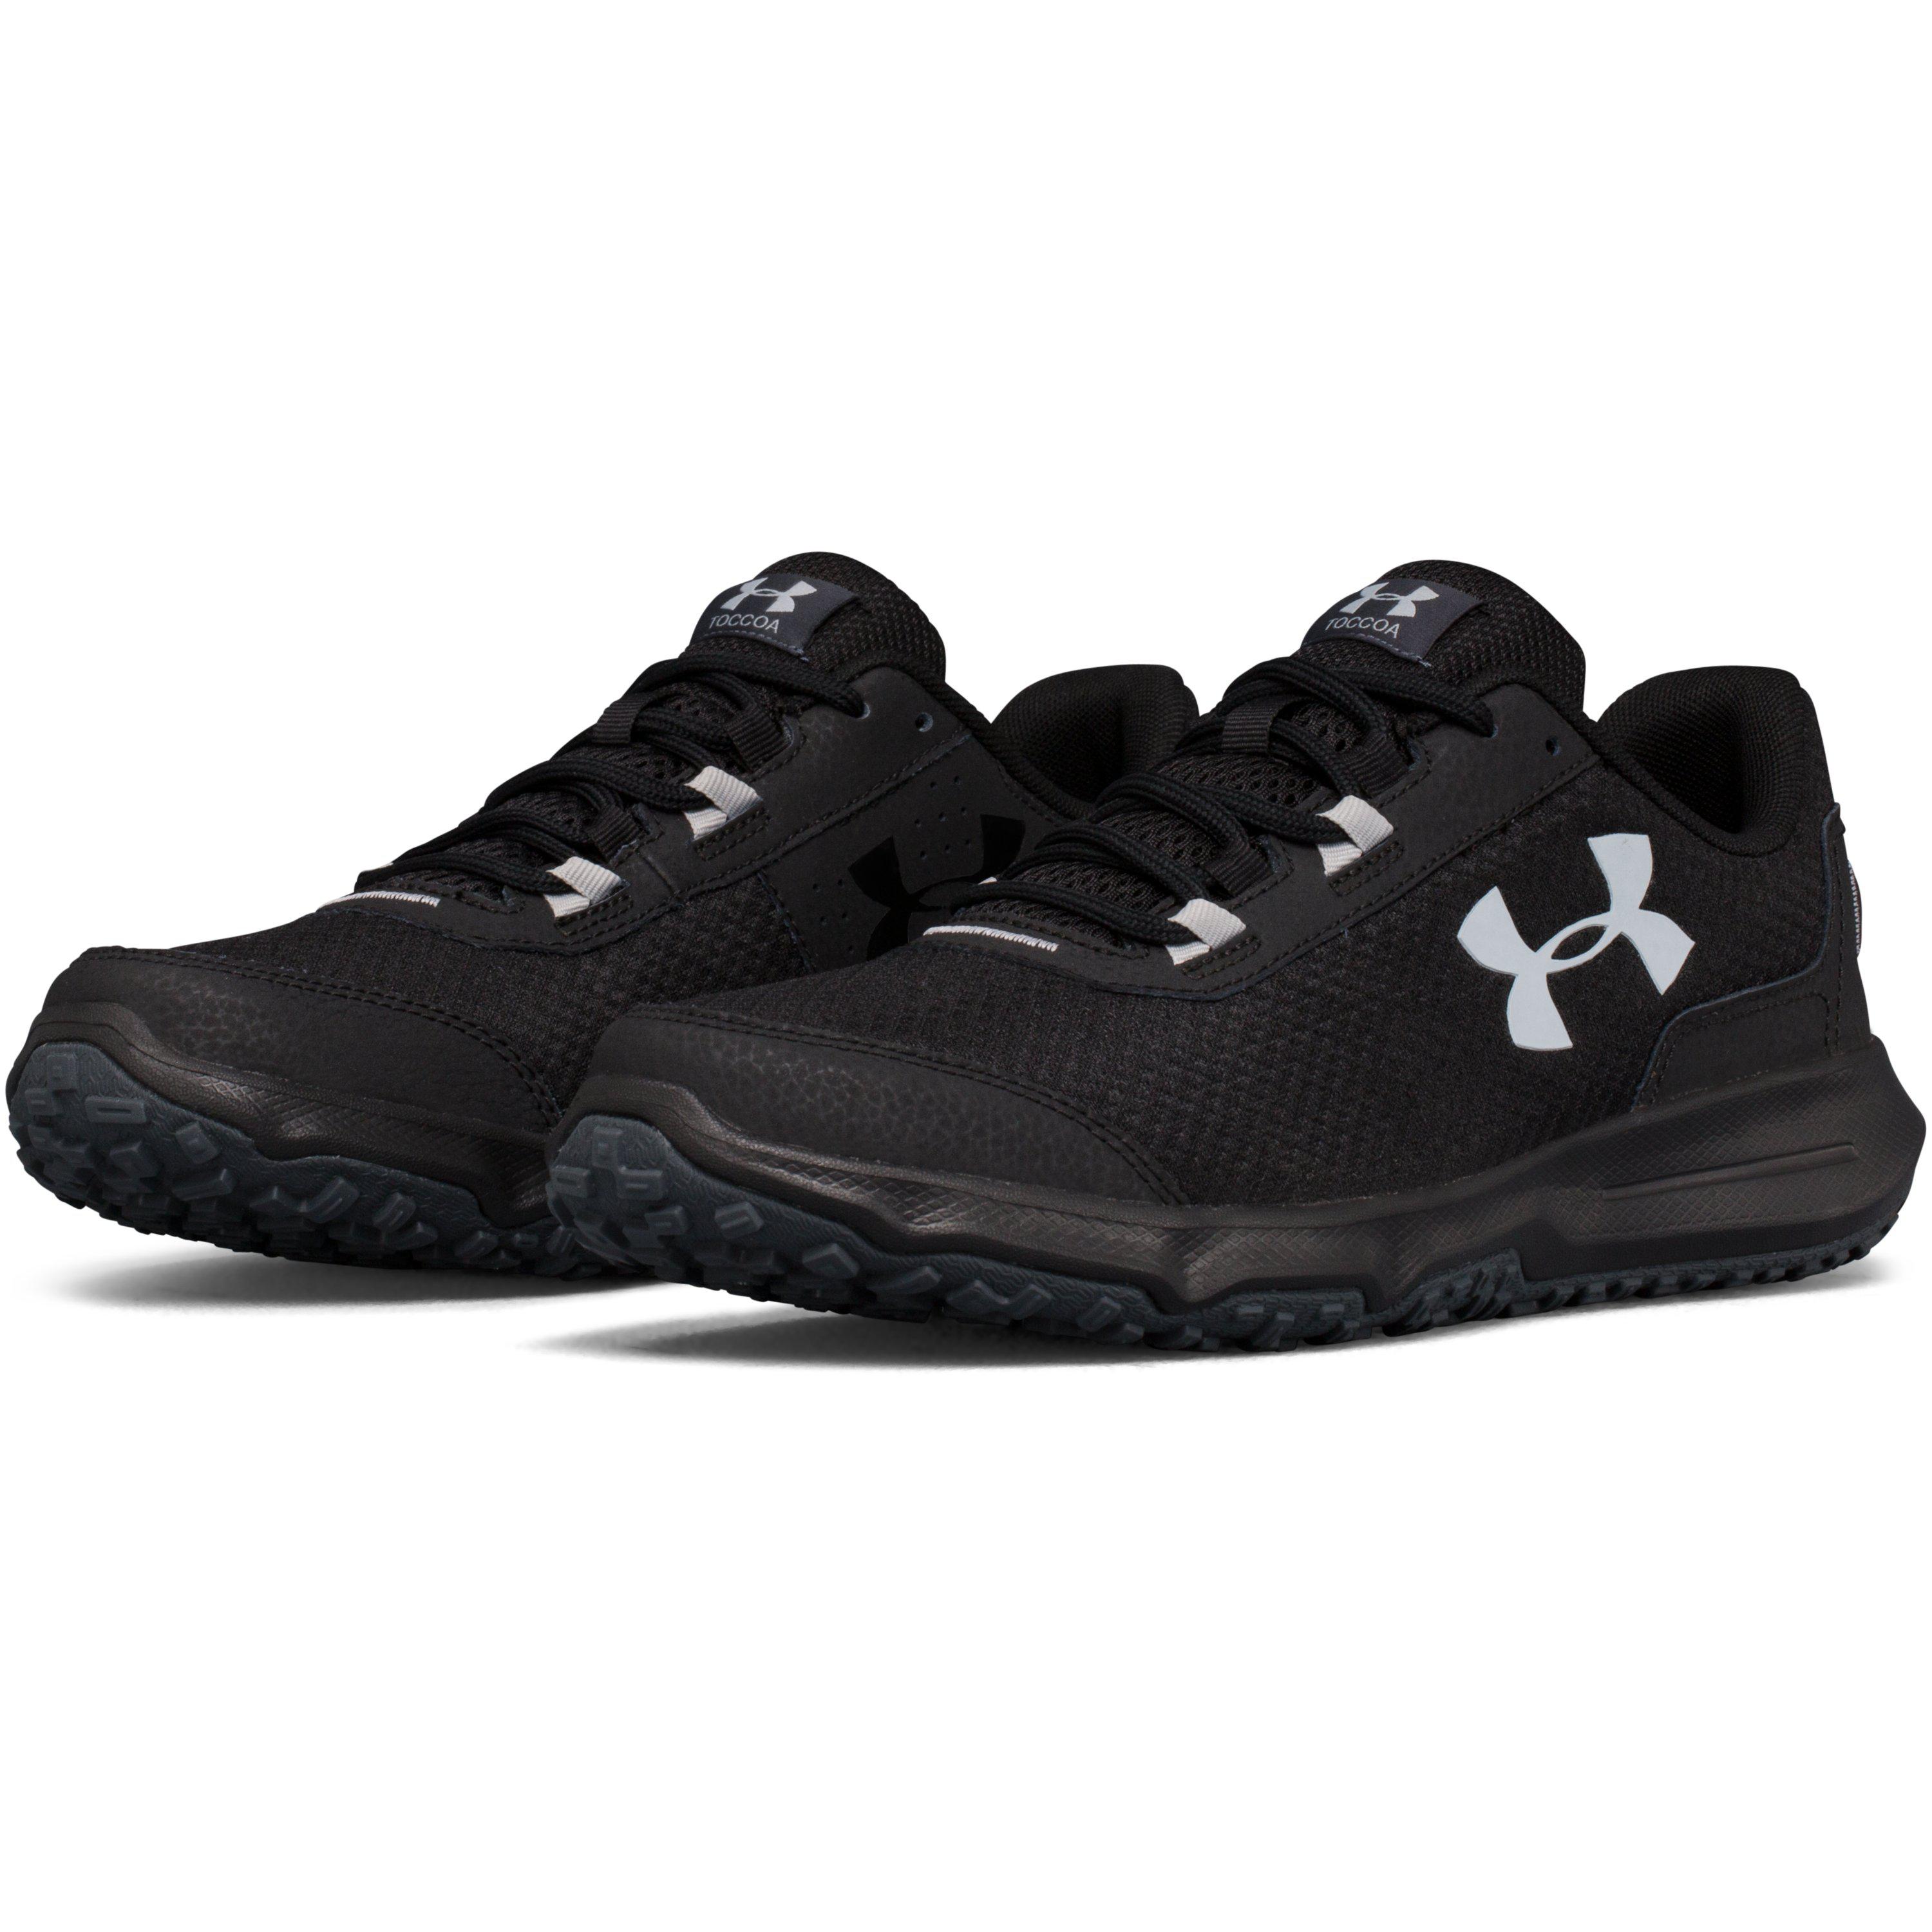 Lyst - Under Armour Men's Ua Toccoa Running Shoes in Black for Men